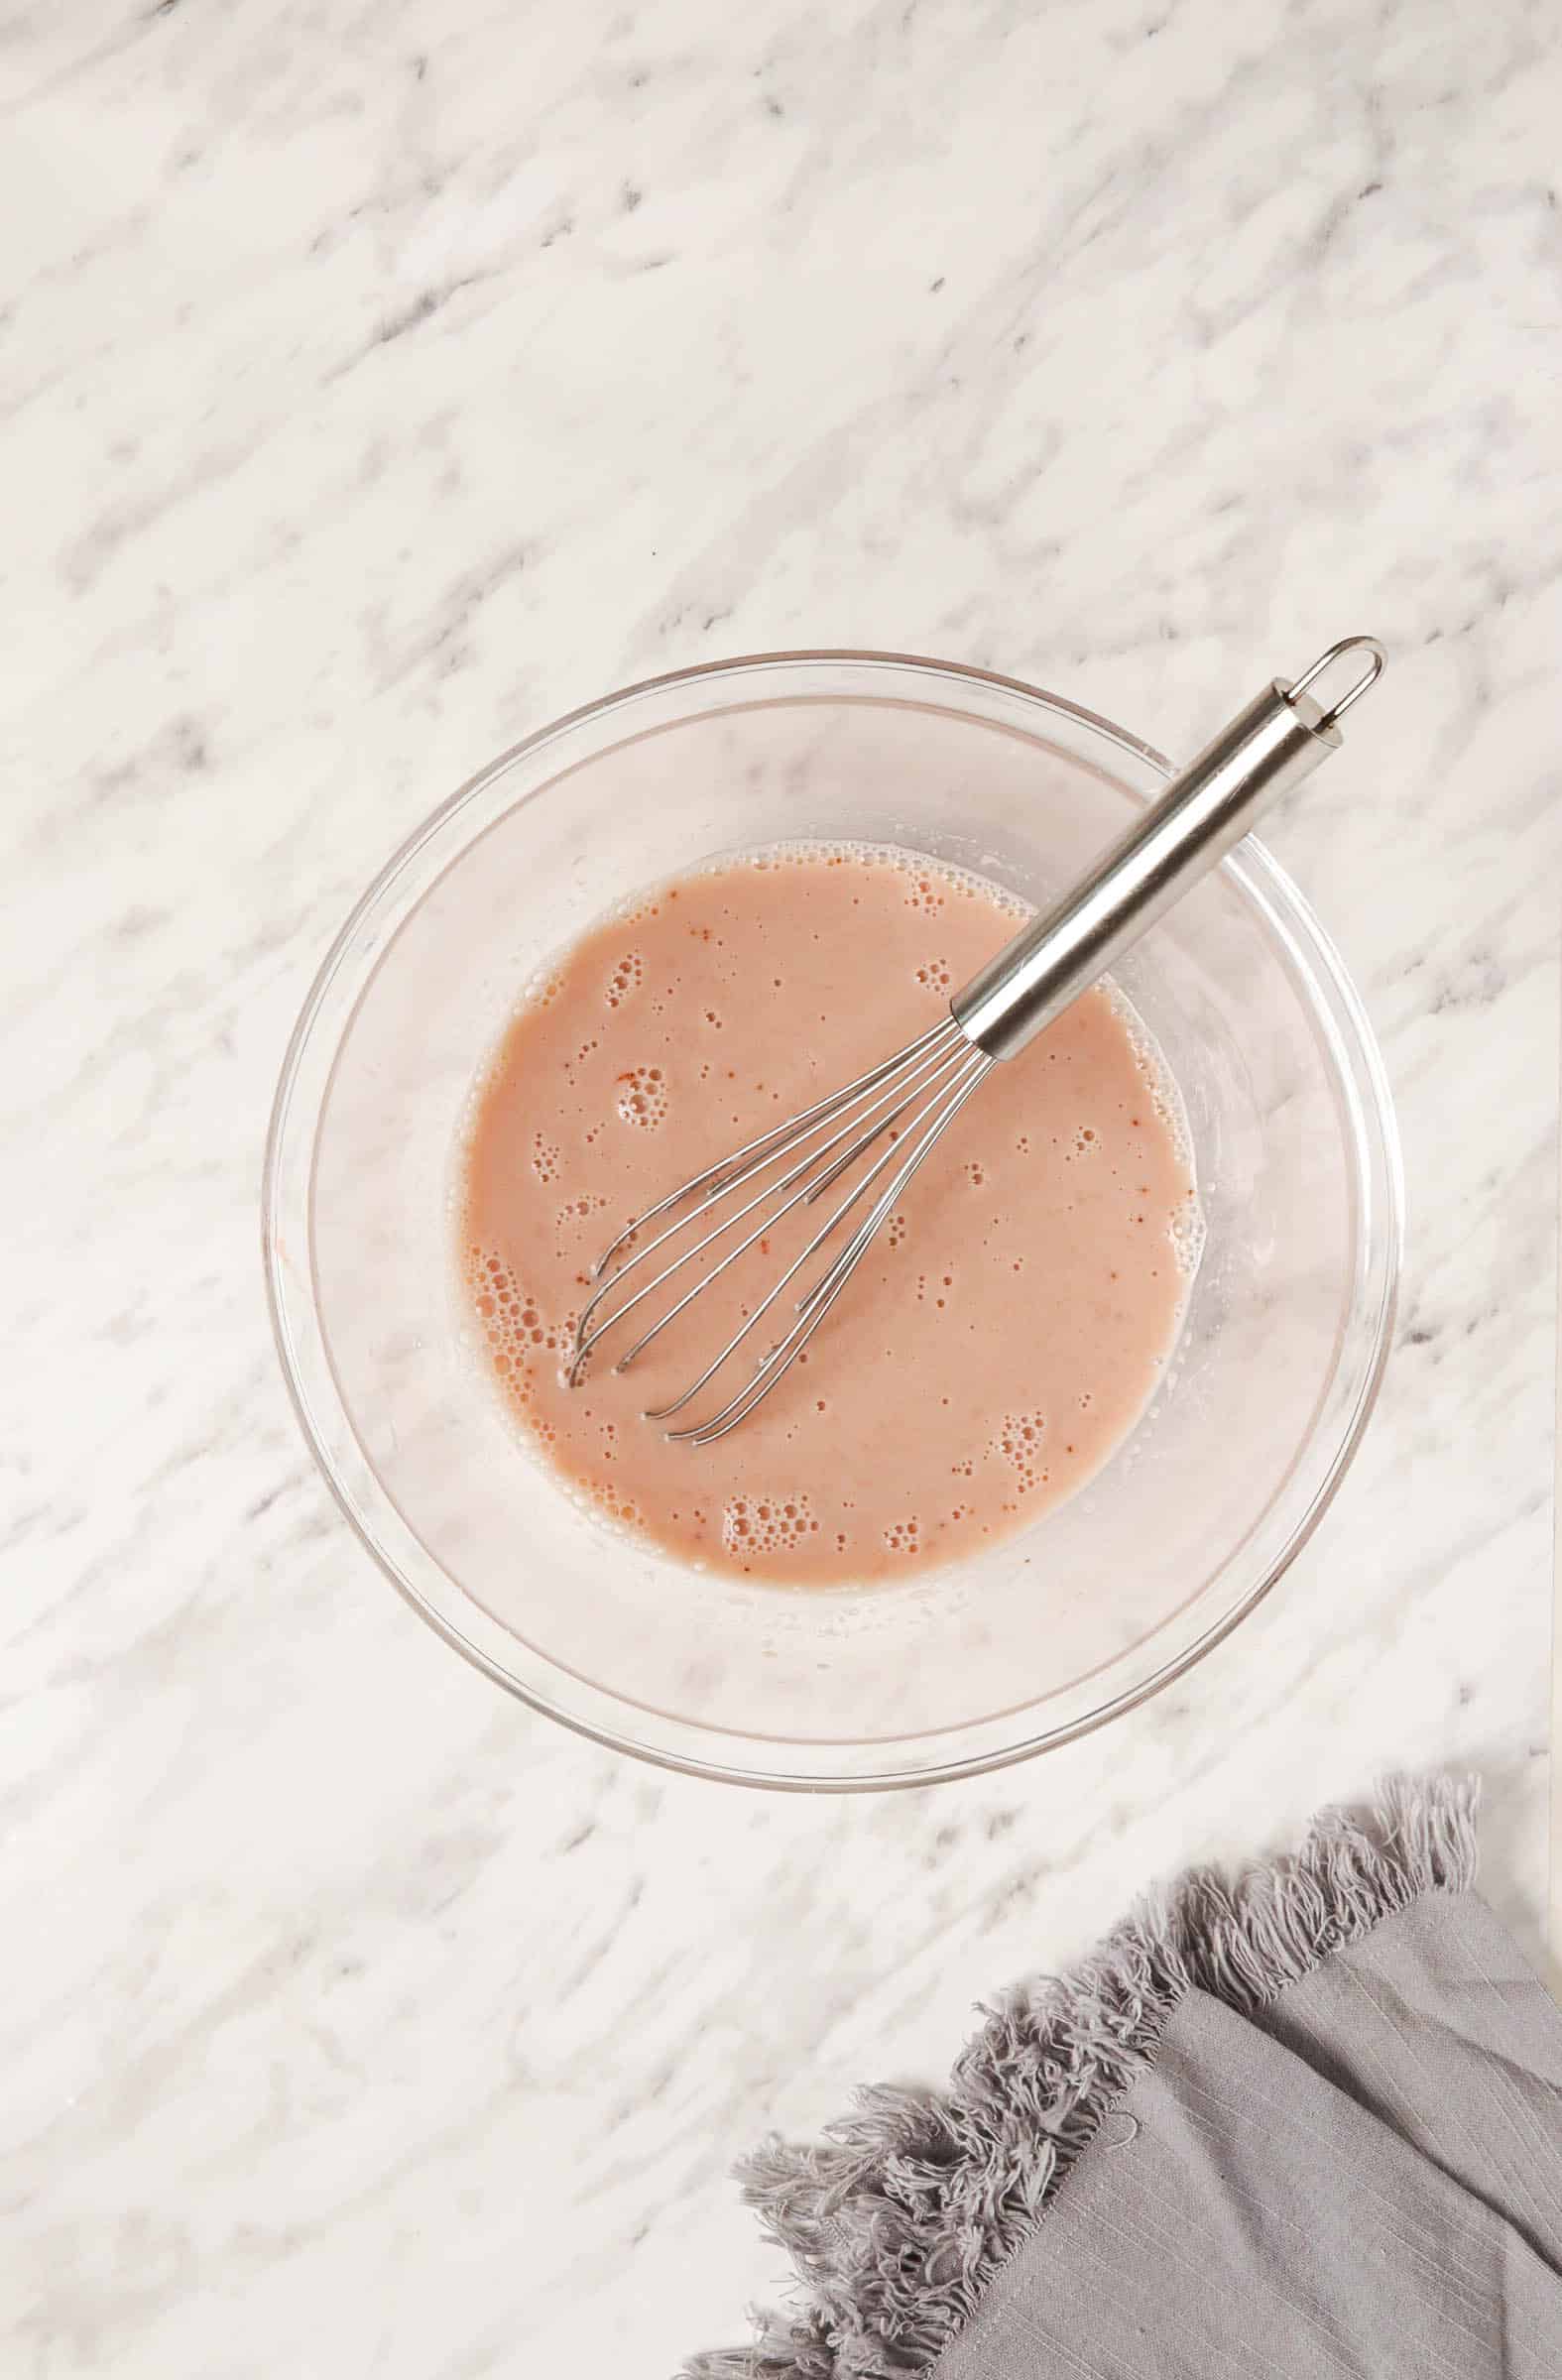 Top view photo of almond milk mixed together with the strawberry mixer with a whisk, in a clear bowl.